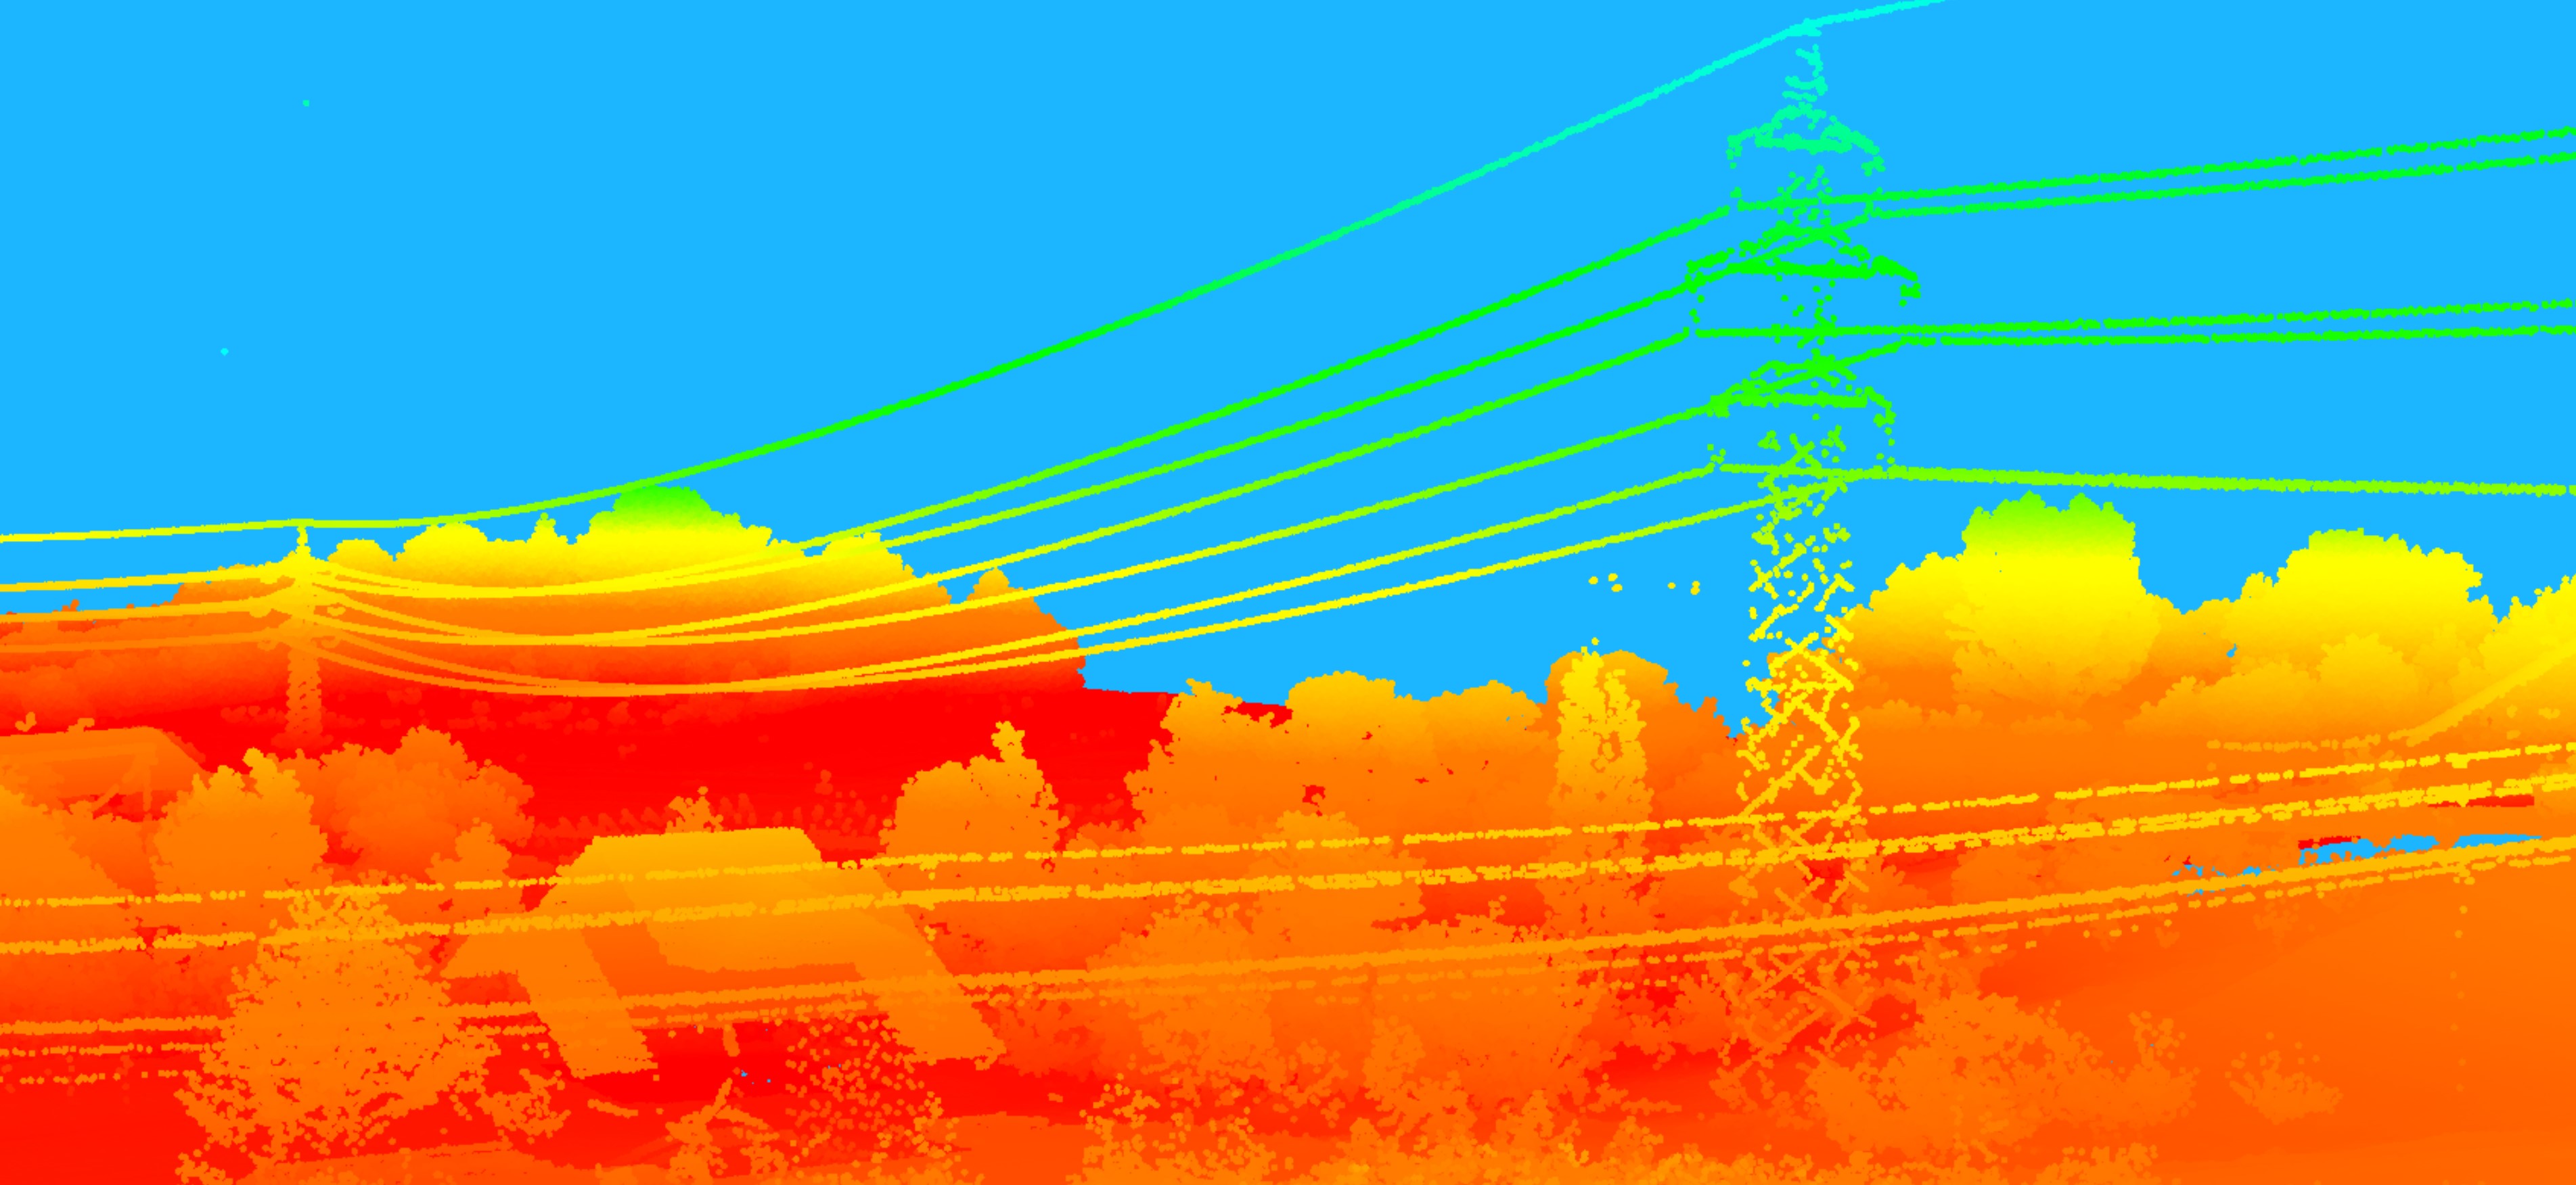 Power line mapping